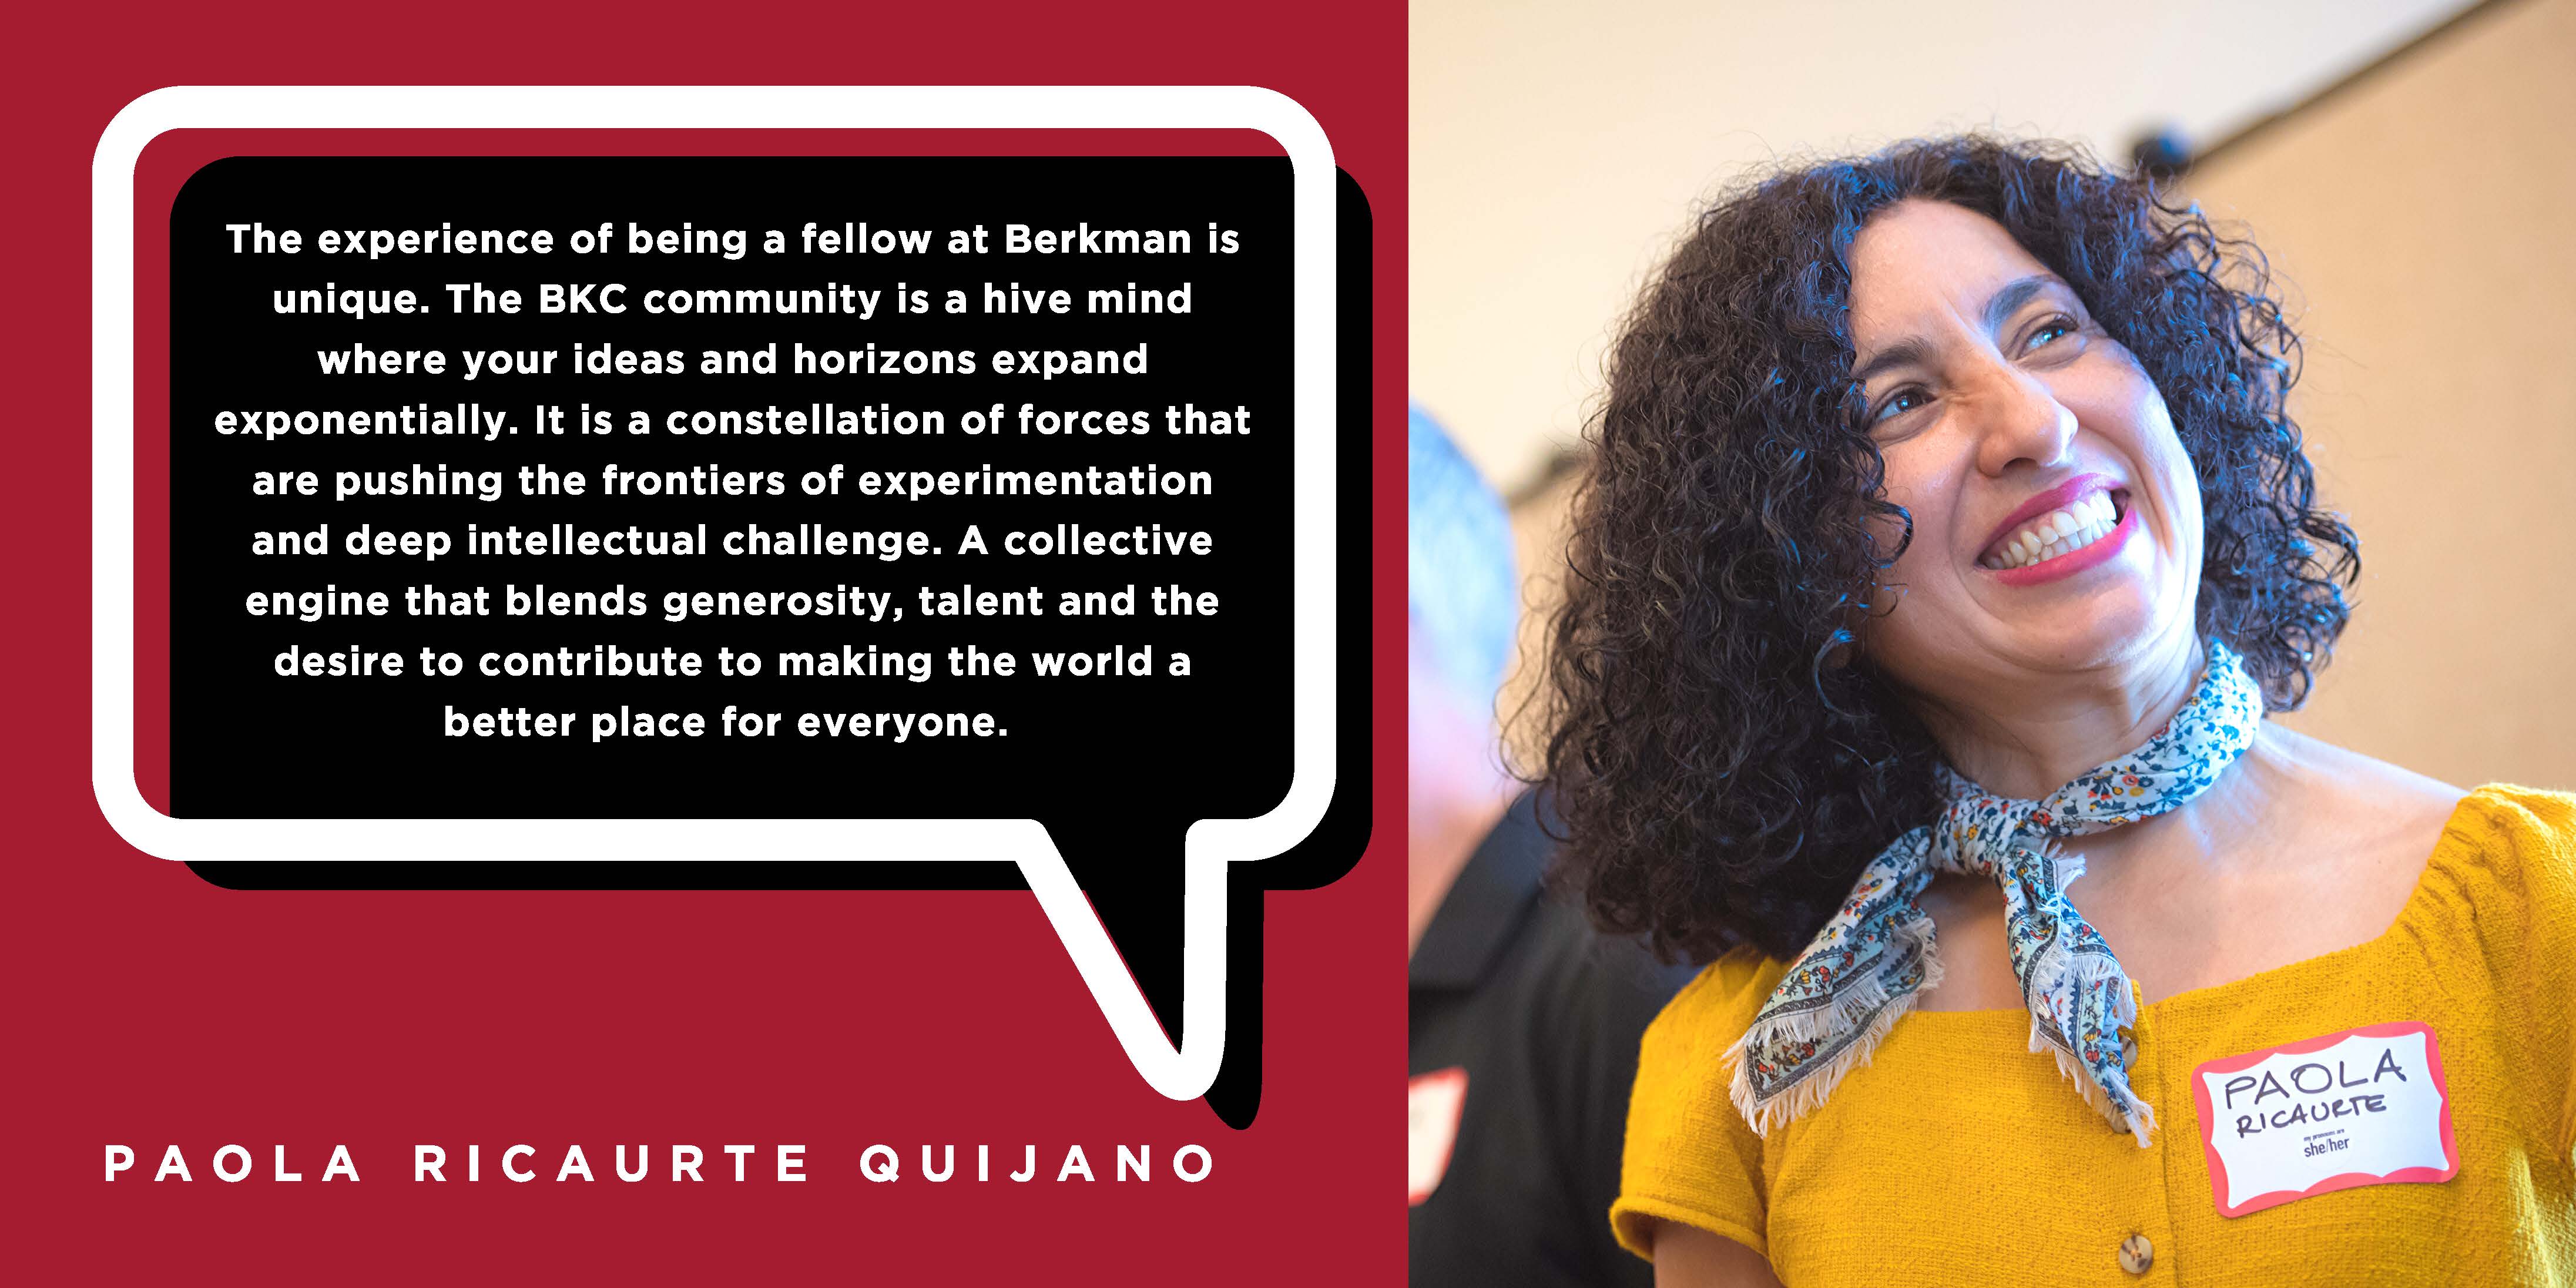 The experience of being a fellow at Berkman is unique. The BKC community is a hive mind where your ideas and horizons expand exponentially. It is a constellation of forces that are pushing the frontiers of experimentation and deep intellectual challenge. A collective engine that blends generosity, talent and the desire to contribute to making the world a better place for everyone. - Paola Ricaurte Quijano 